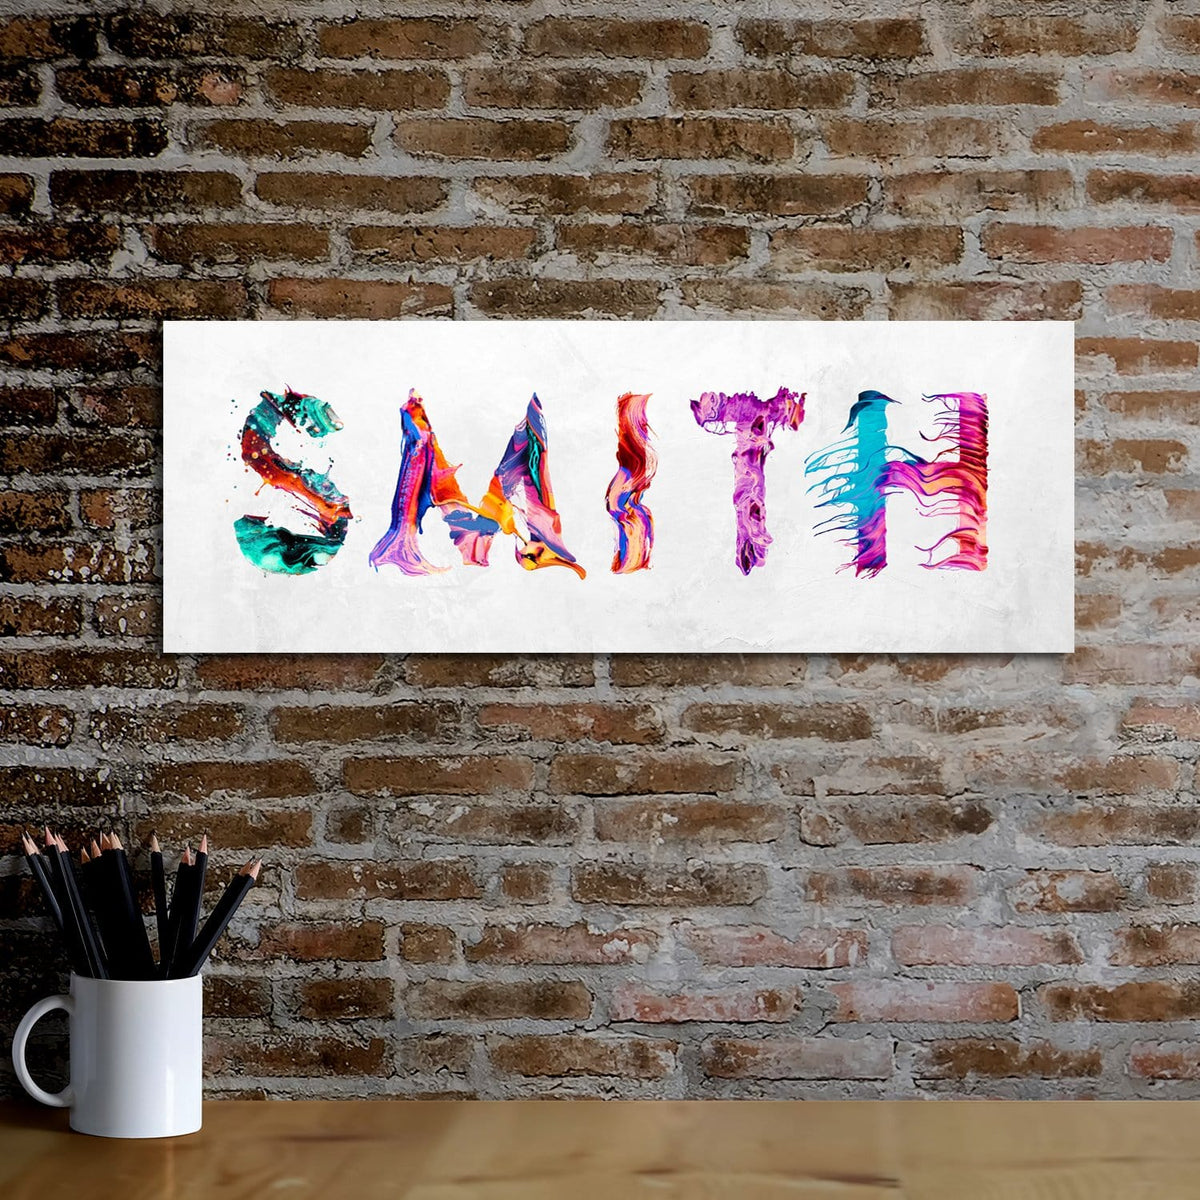 Contemporary Modern Decor of Colorful Splatter-paint Typography- Lifestyle